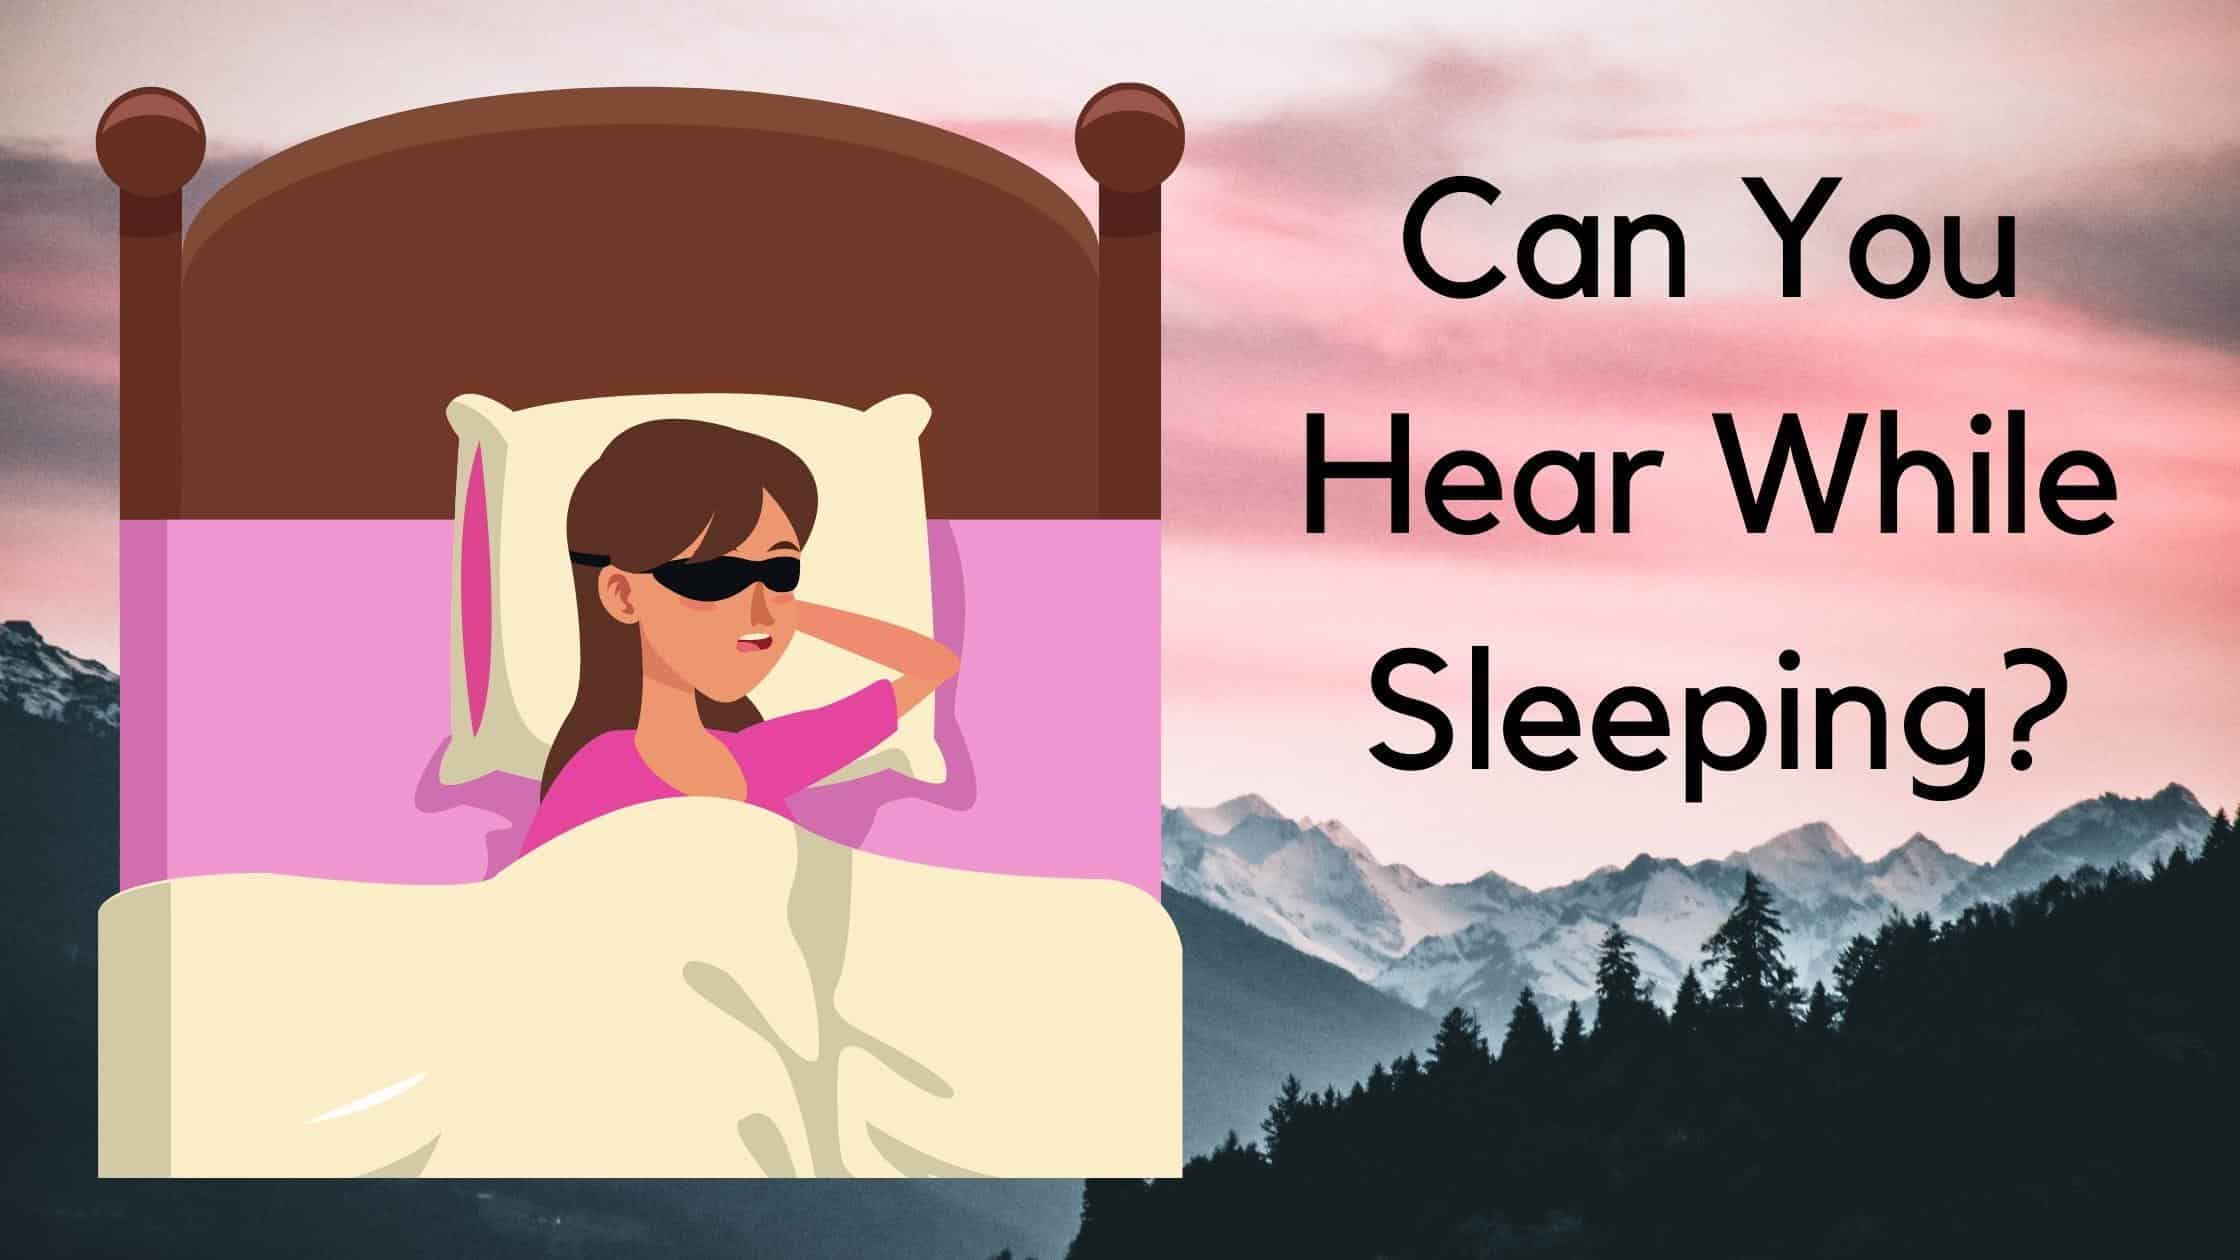 Can You Hear While Sleeping?